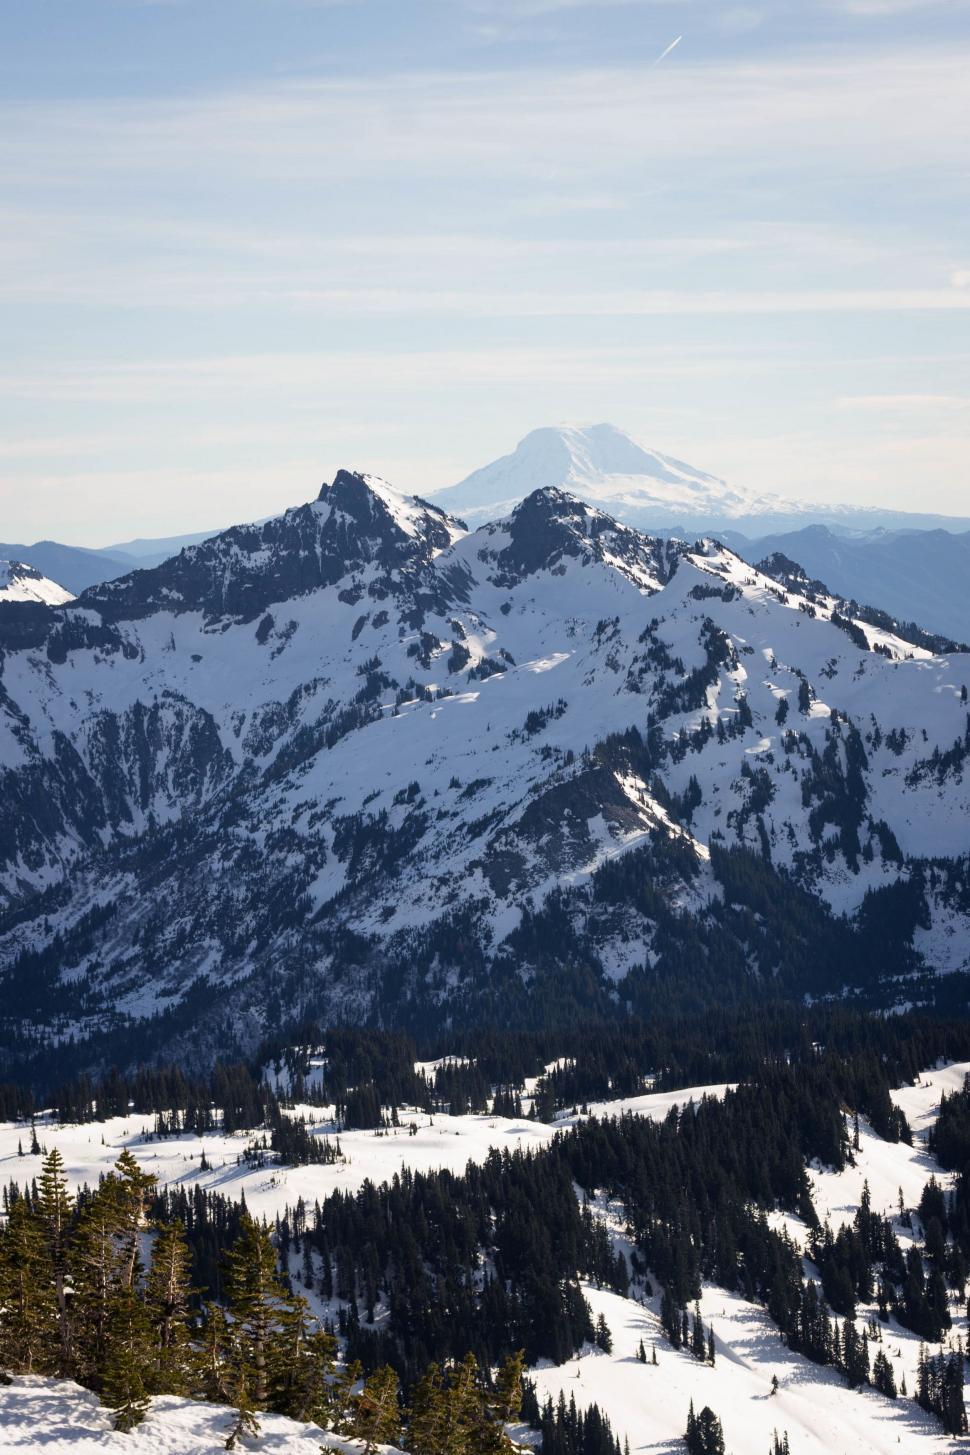 Free Image of Majestic Snow-Covered Mountain Range 